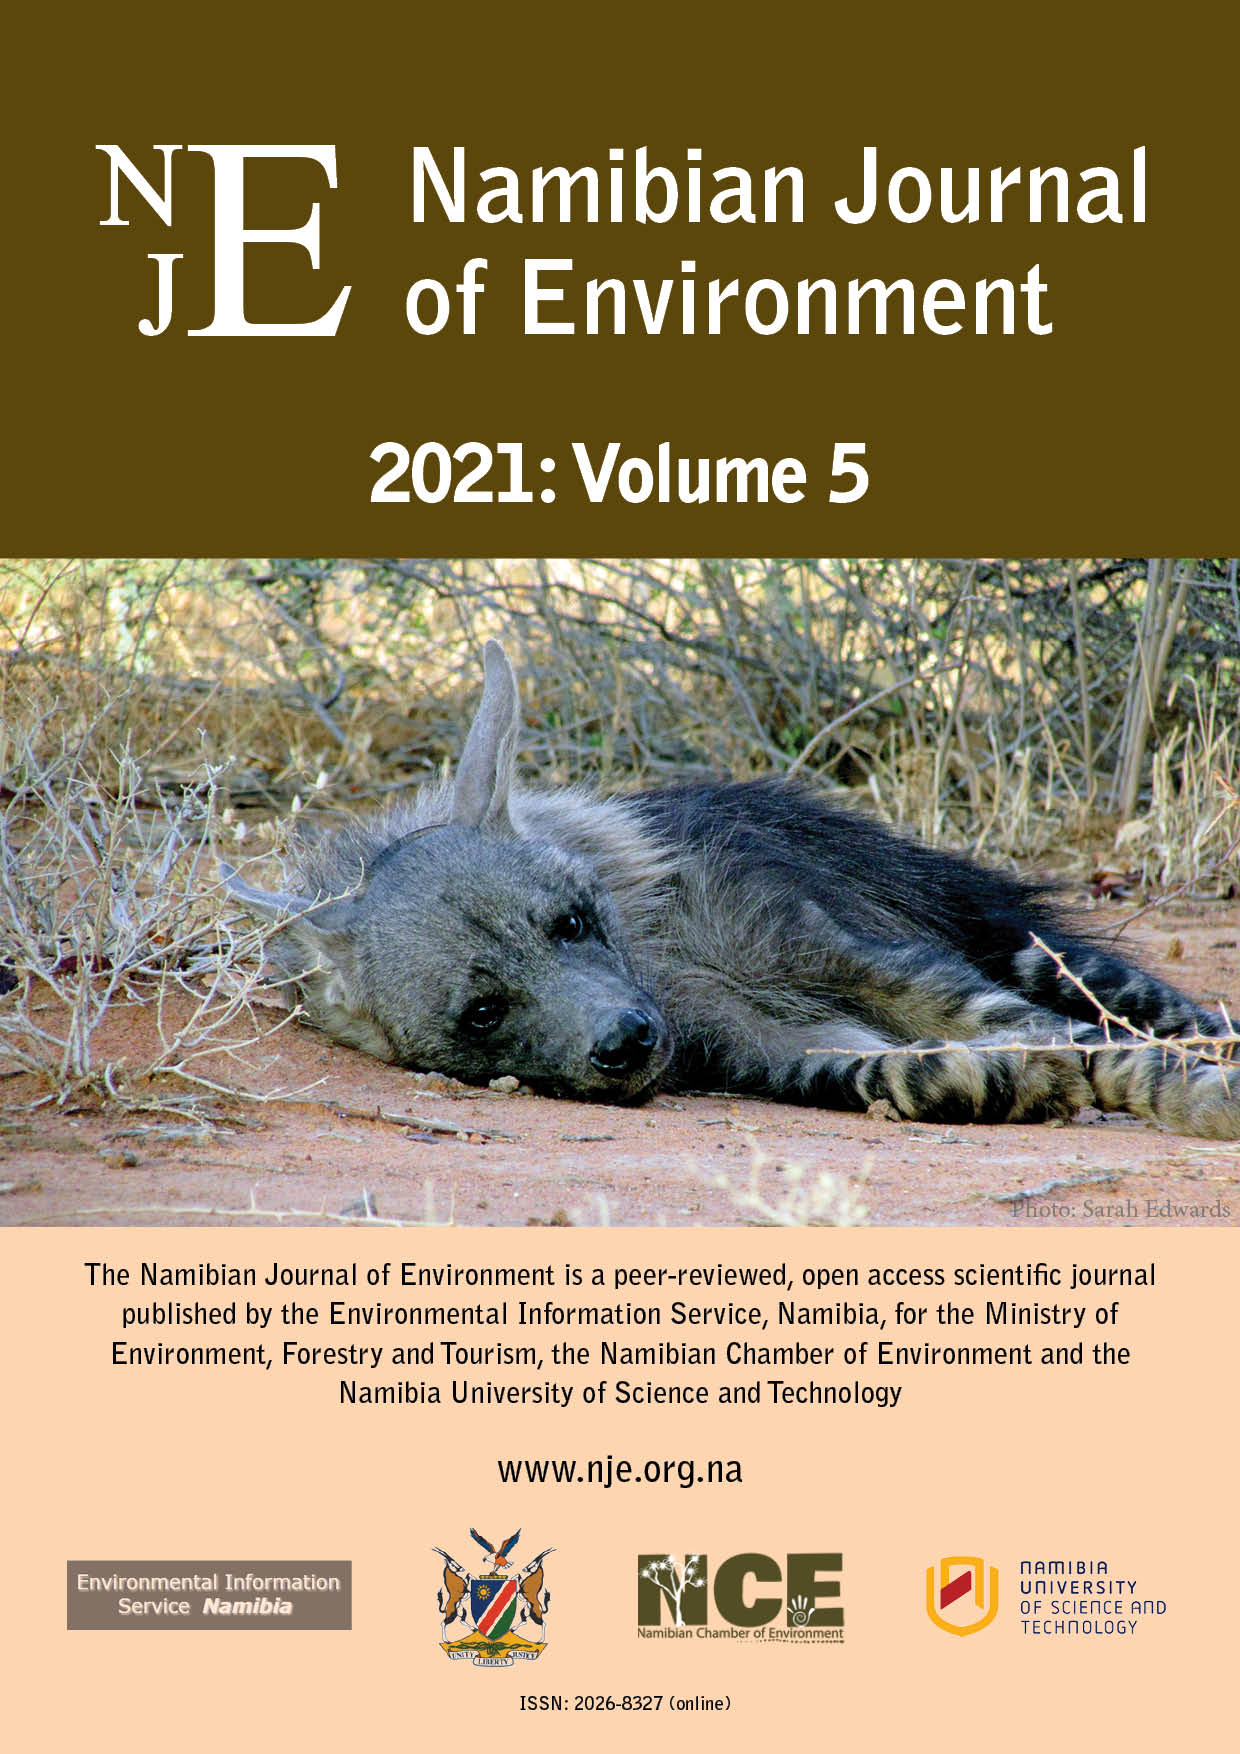 Cover of Namibian Journal of Environment 2021 Volume 5